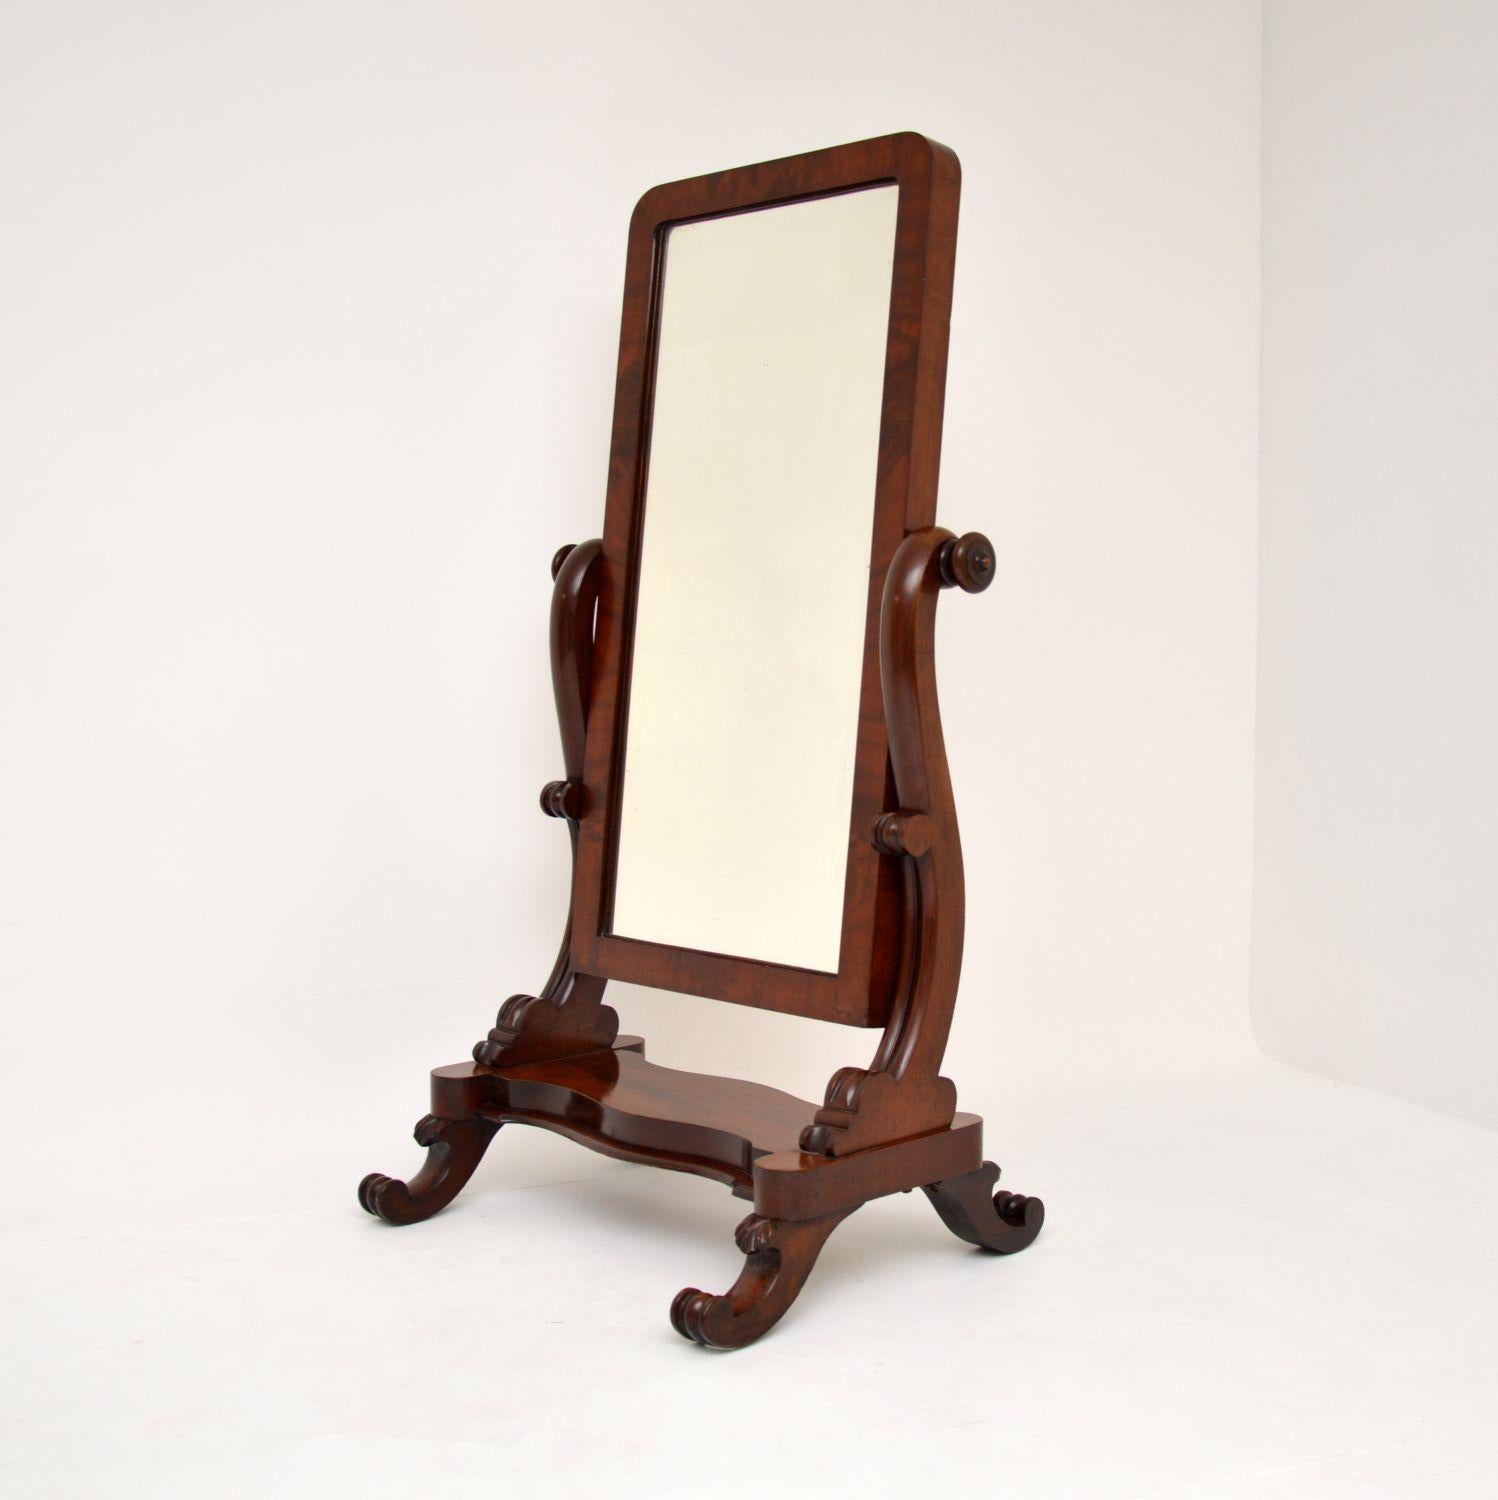 A fantastic original Mid-Victorian cheval mirror. This was made in England, it dates from around 1860-1880.

This is very well made and is a great size, large enough for use as a full length floor mirror when tilted, but not too imposing. The base